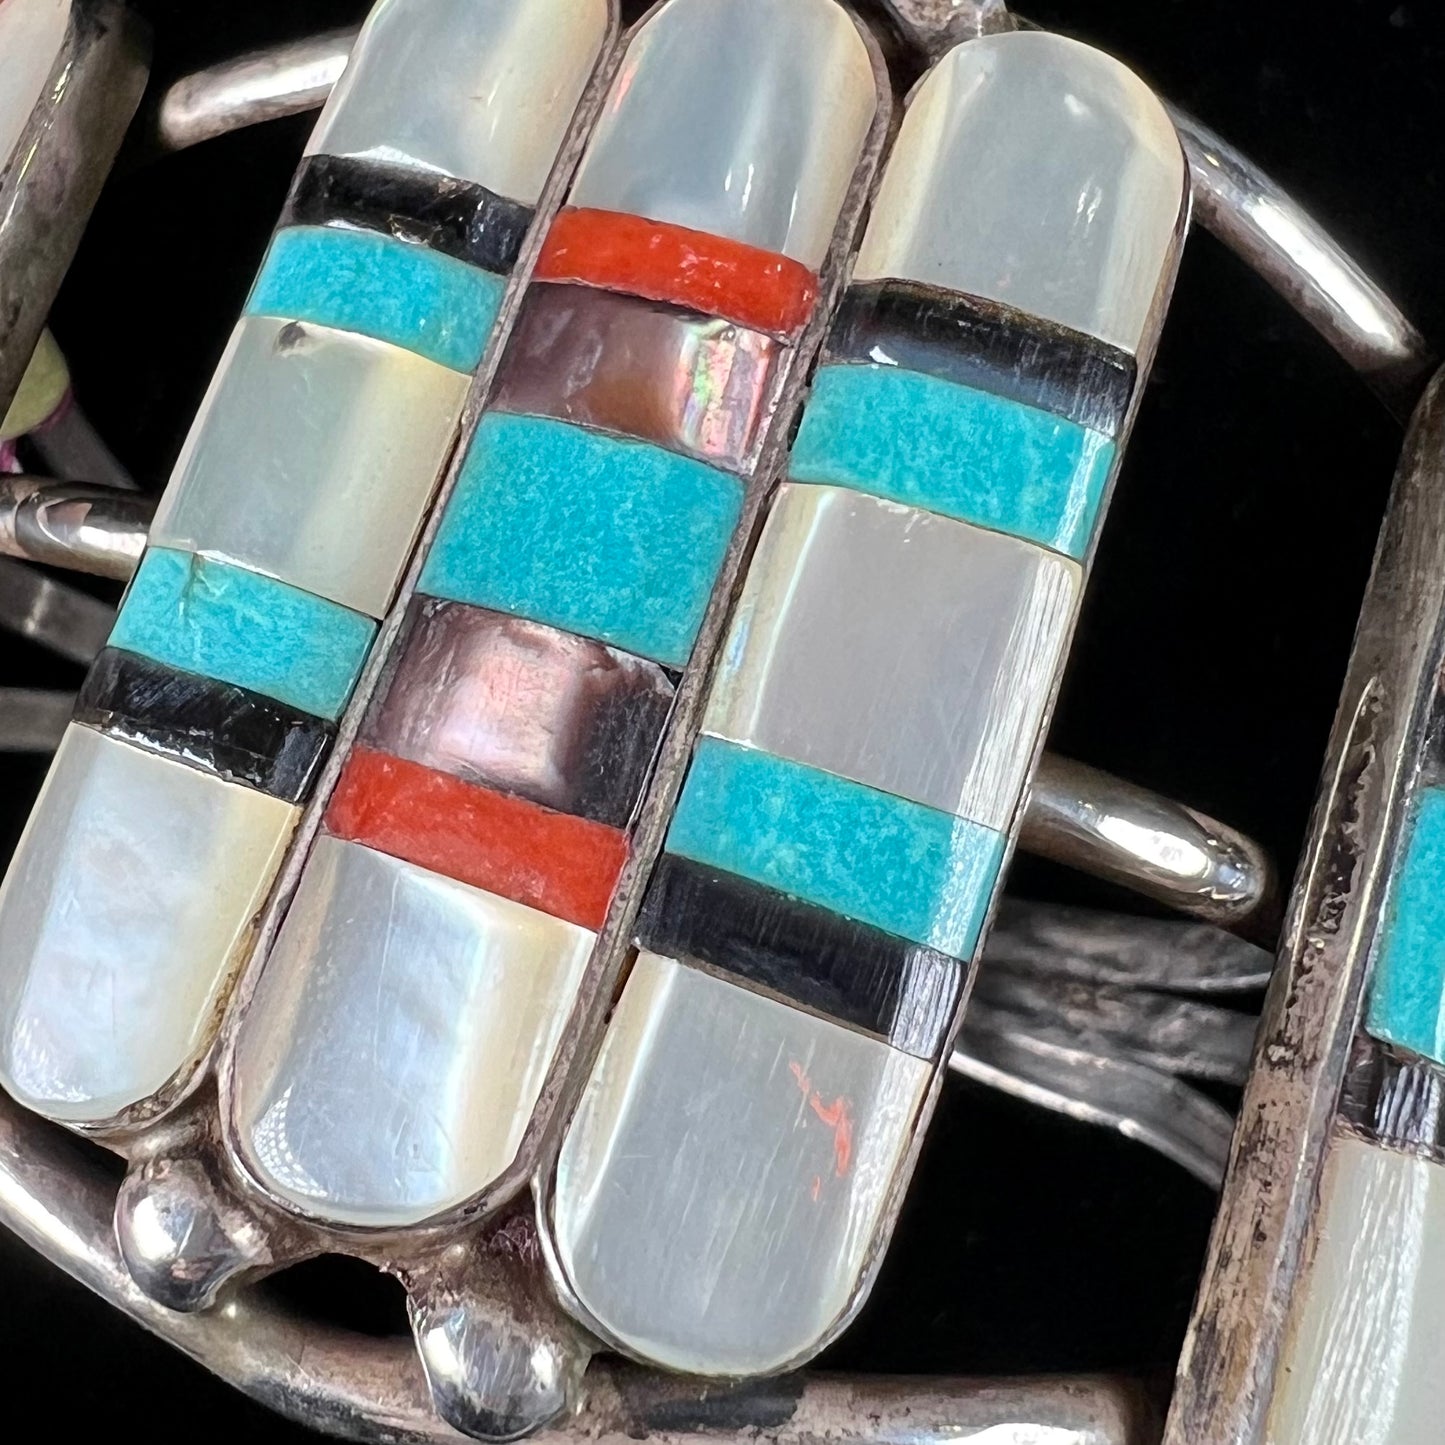 A vintage Zuni Indian-made inlay cuff bracelet set with mother of pearl, coral, turquoise, and jet stones.  The piece is signed "PONCHO."